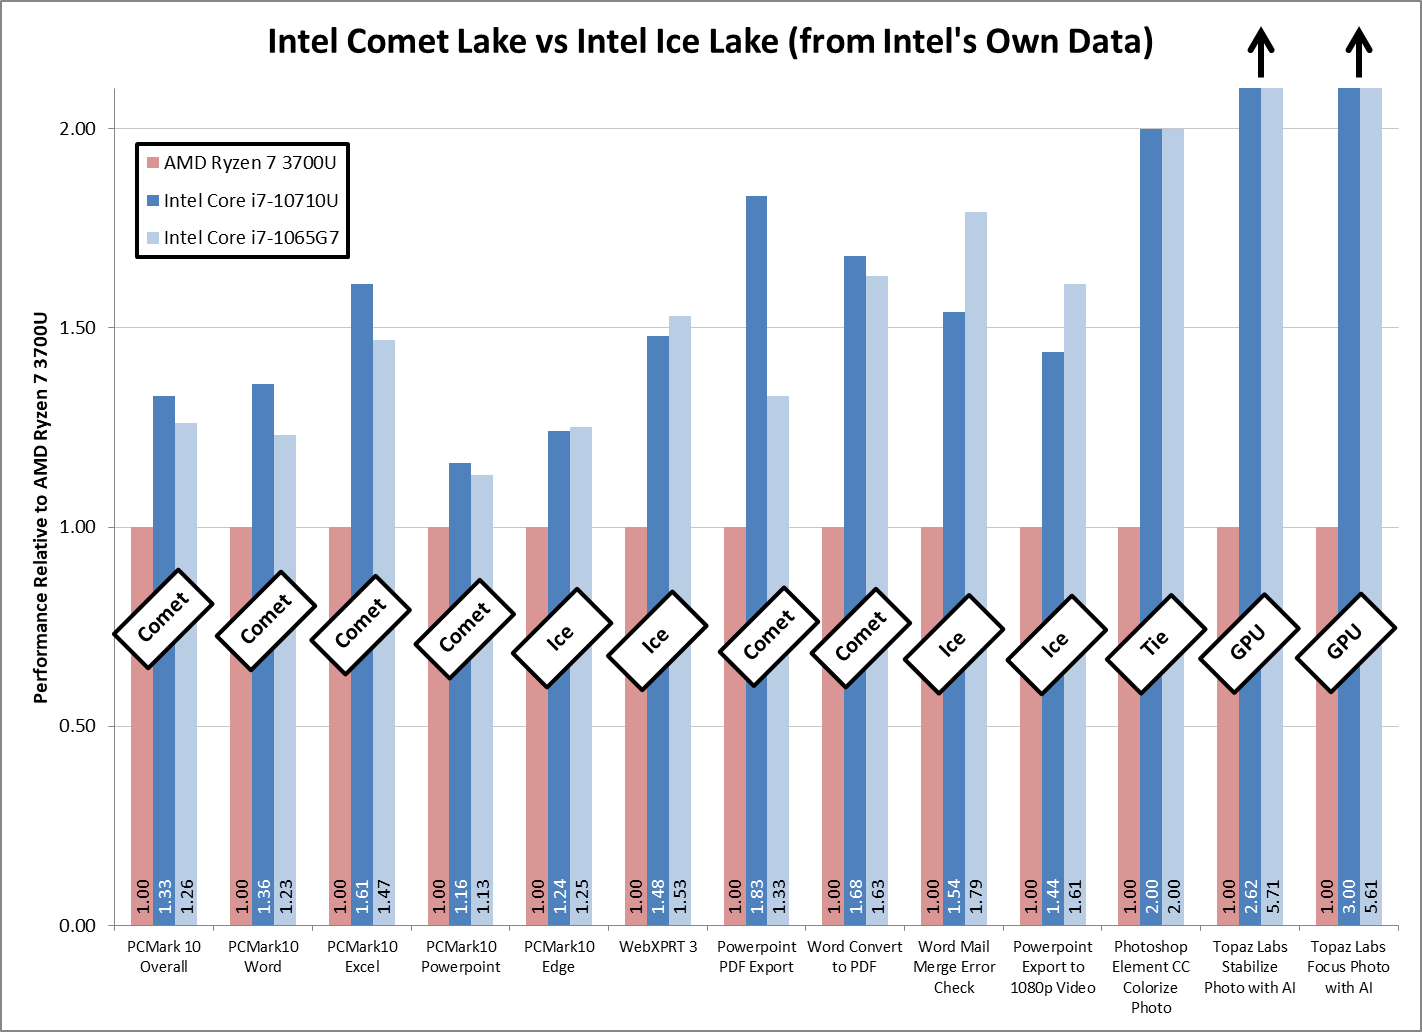 Intel’s Confusing Messaging: Is Comet Lake Better Than Ice Lake? 6